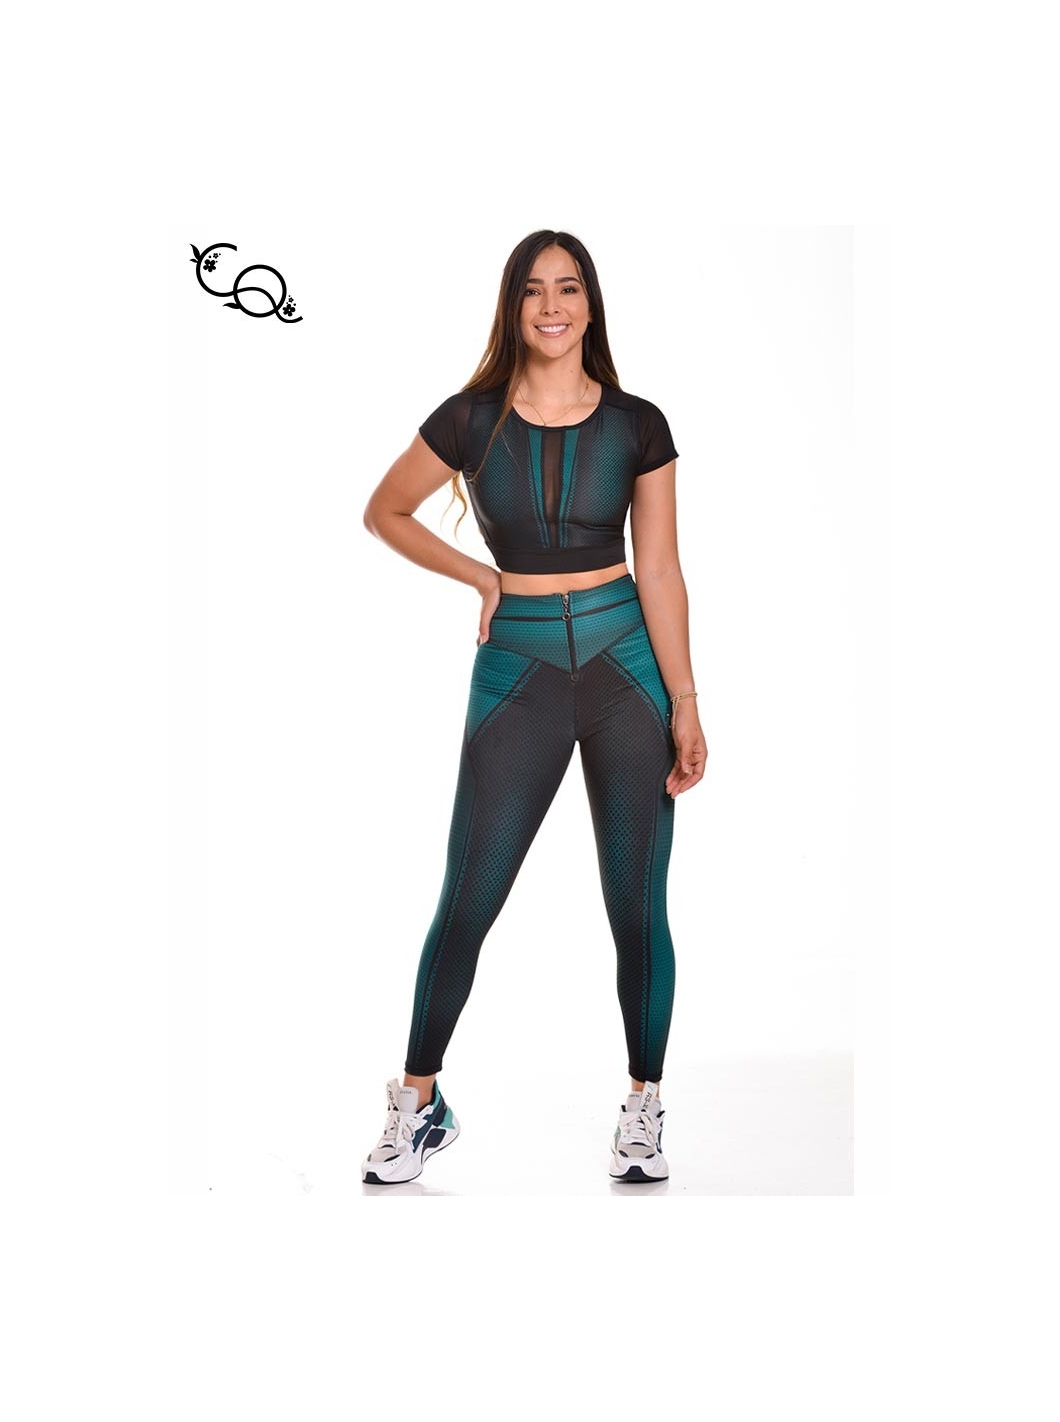 Gym Sports Outfits - B&M Online Store